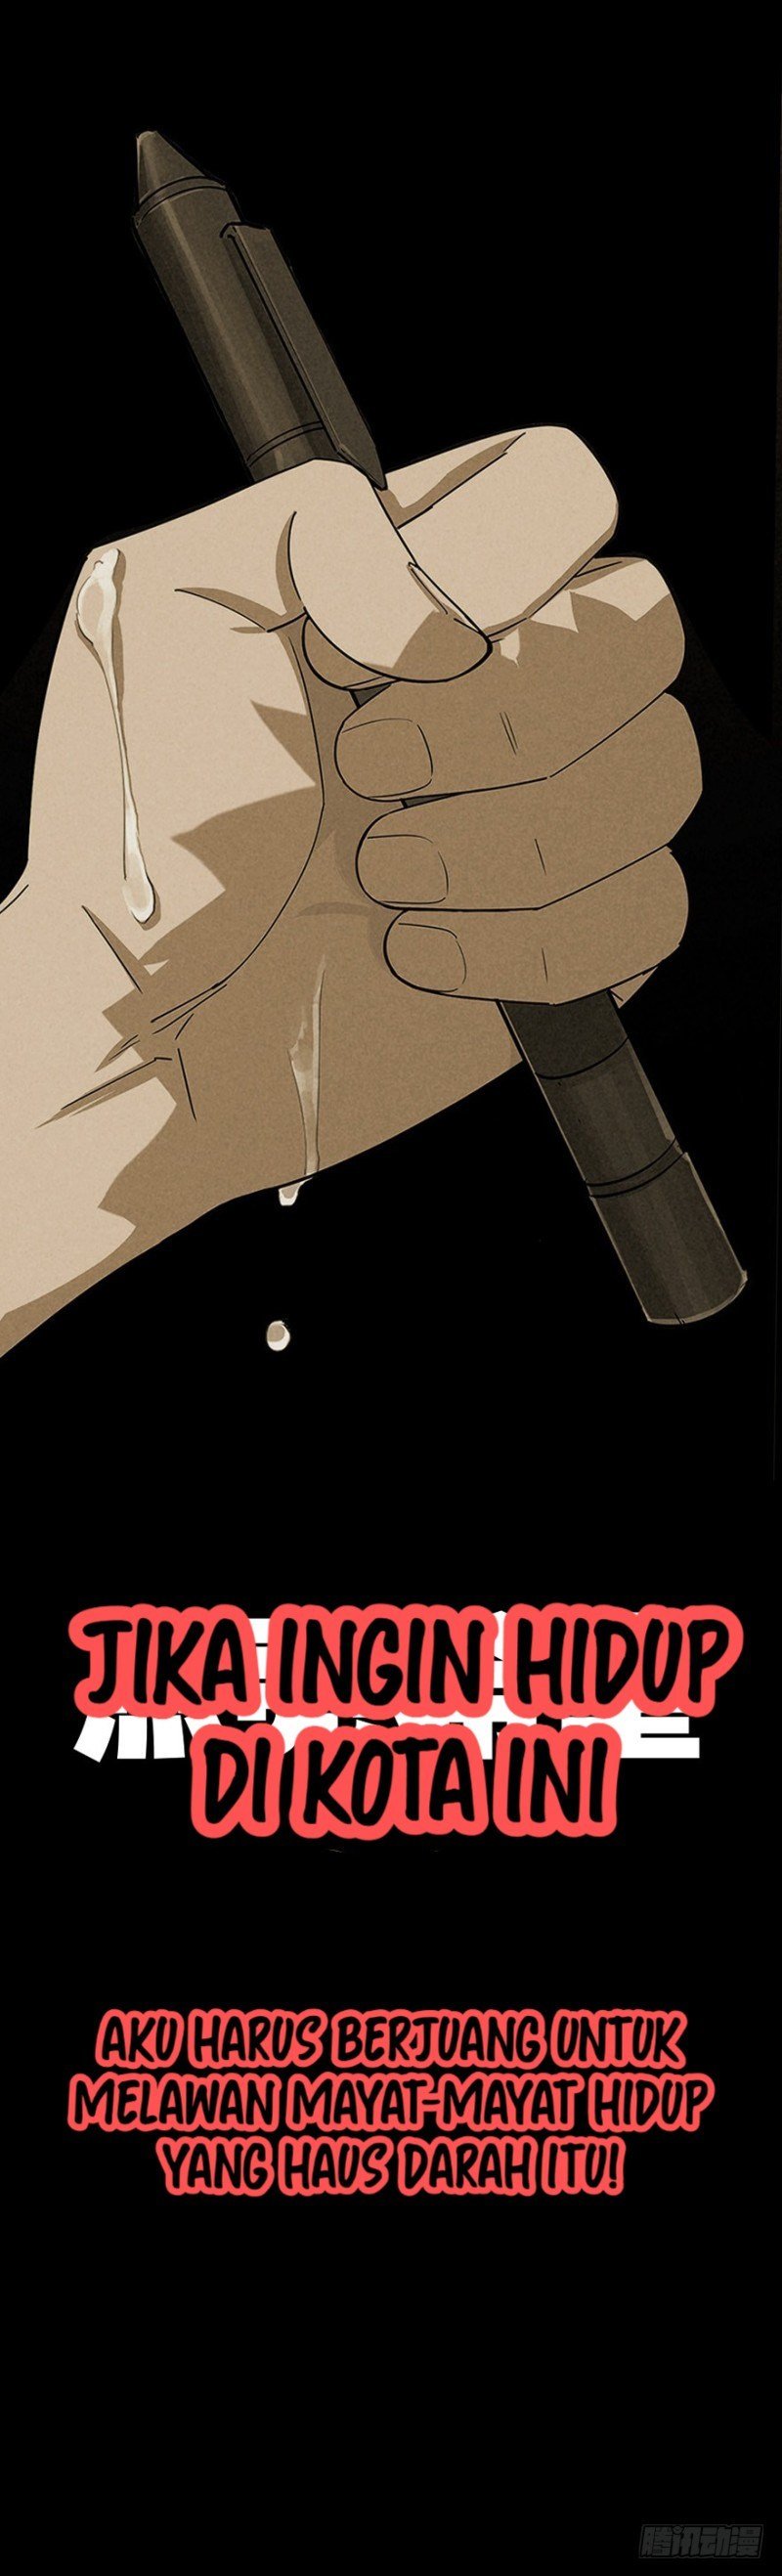 Baca End of The World 2028 (Trace of Doomsday) Chapter 1  - GudangKomik